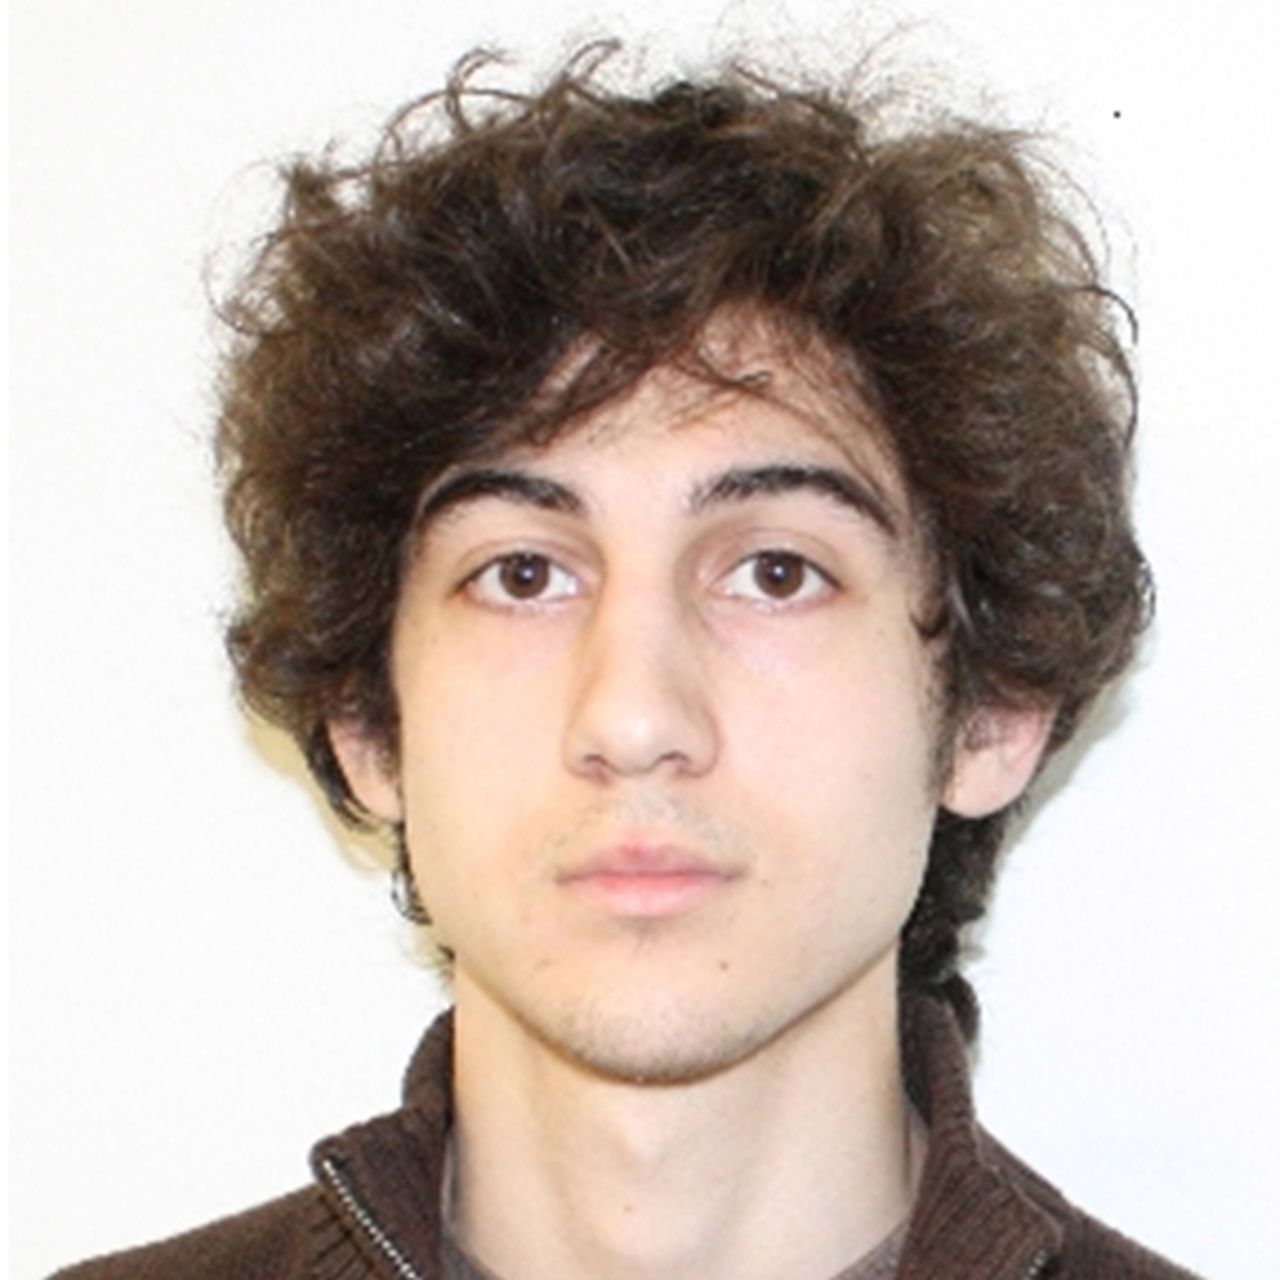 <a href="https://www.cnn.com/2013/06/03/us/boston-marathon-terror-attack-fast-facts/index.html" target="_blank">Dzhokhar Tsarnaev</a> was given a death sentence for the April 2013 double bombings near the finish line of the Boston Marathon. The bombings killed three people and injured more than 260.